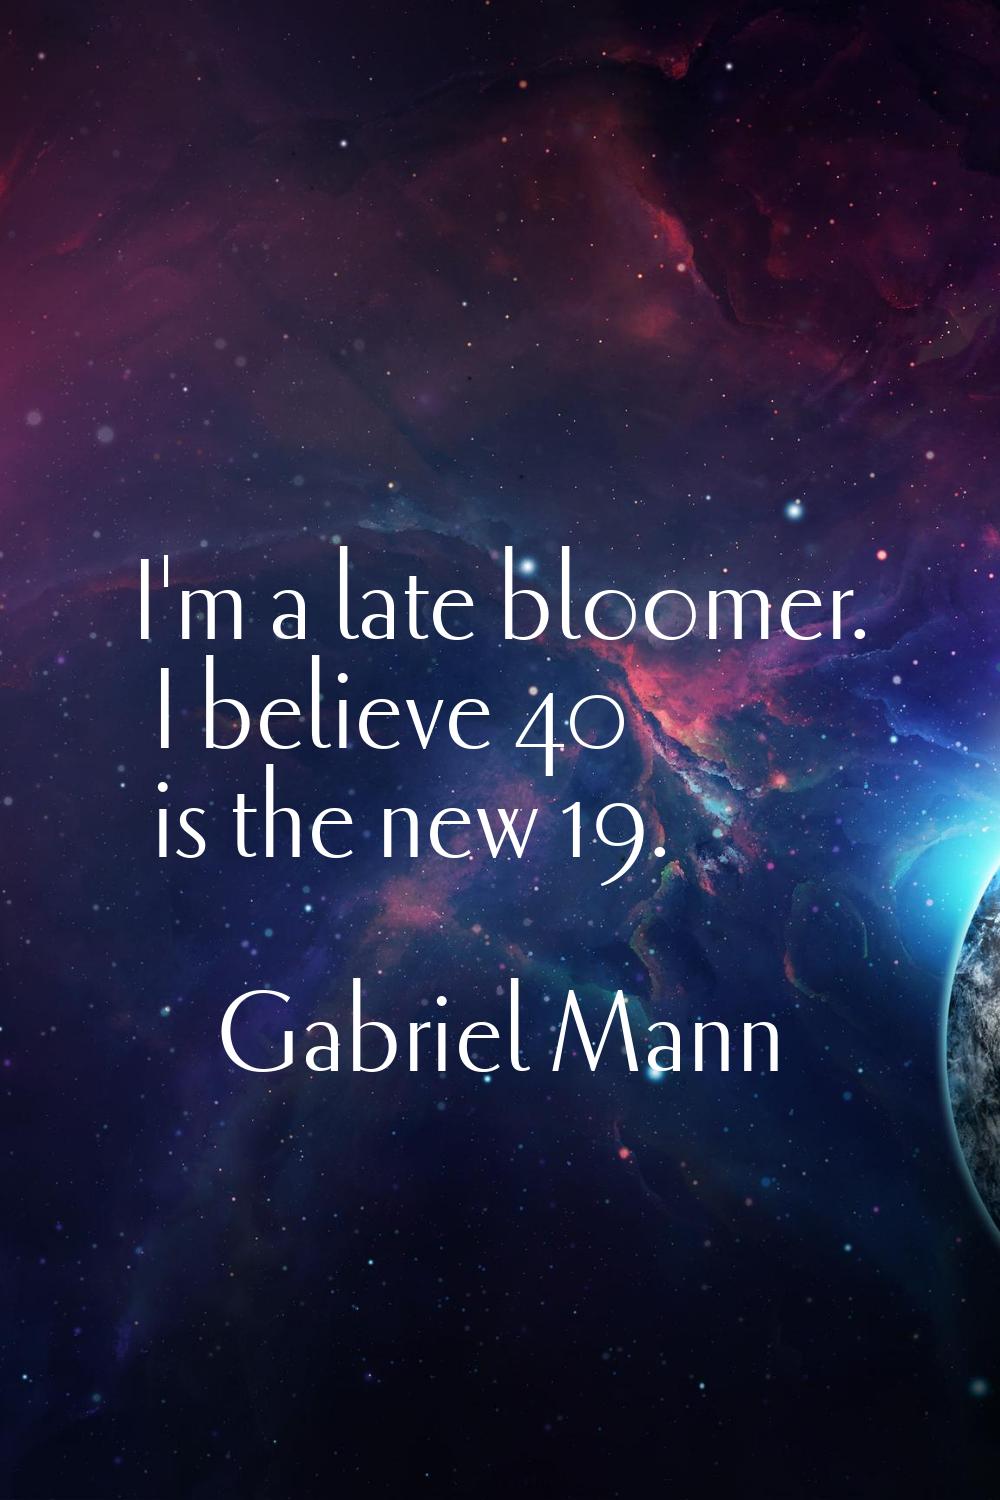 I'm a late bloomer. I believe 40 is the new 19.